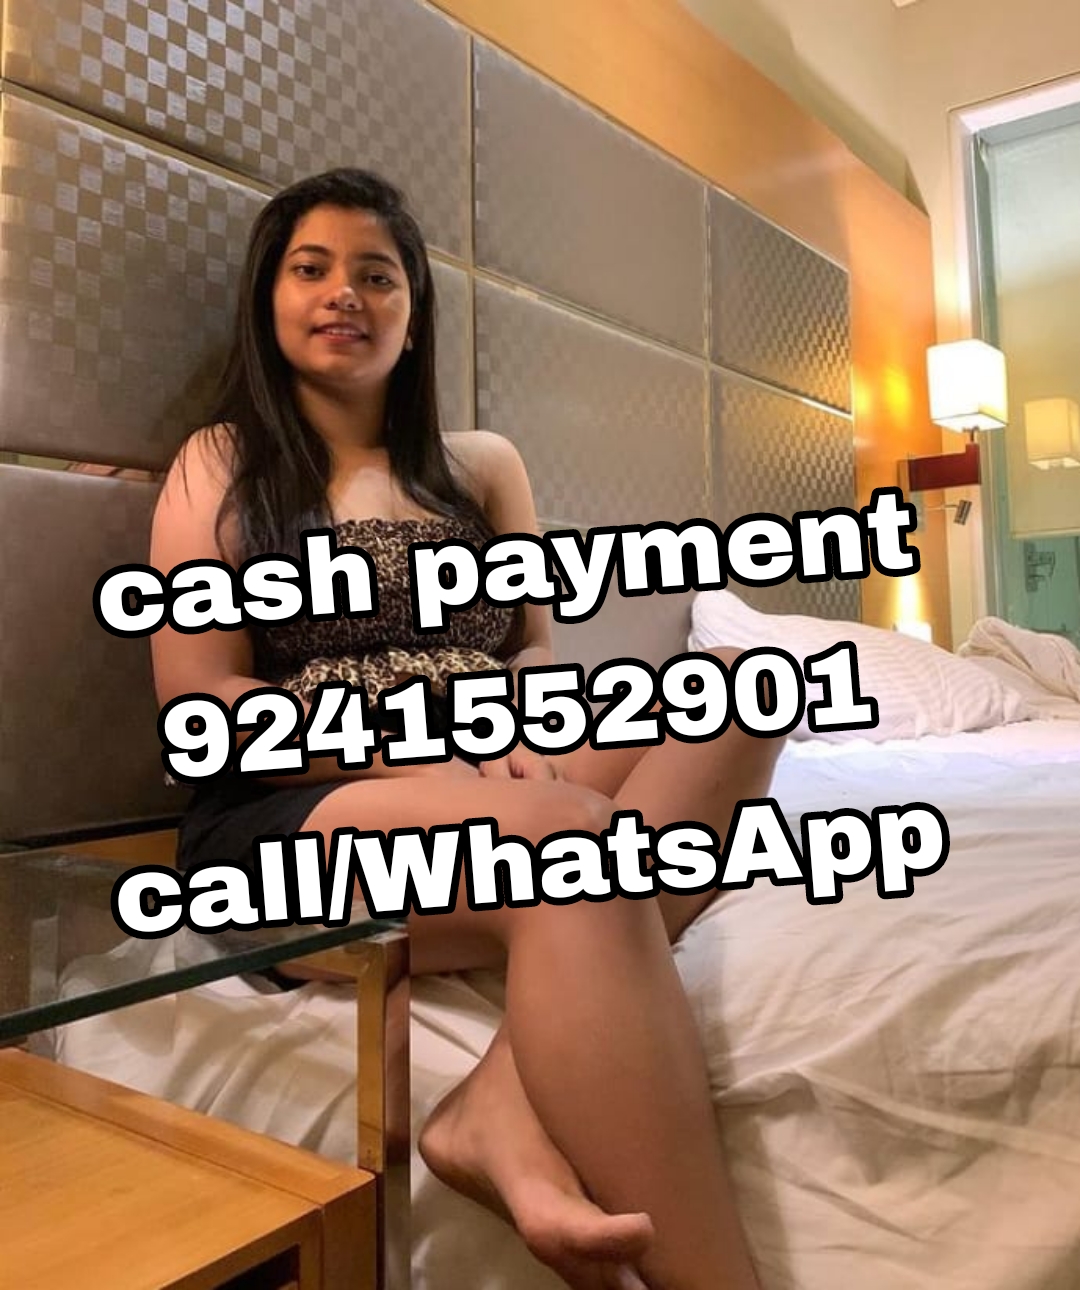 PANVEL IN BEST SERVICE LOW PRICE FULL TRUSTED GENUINE SERVICE 